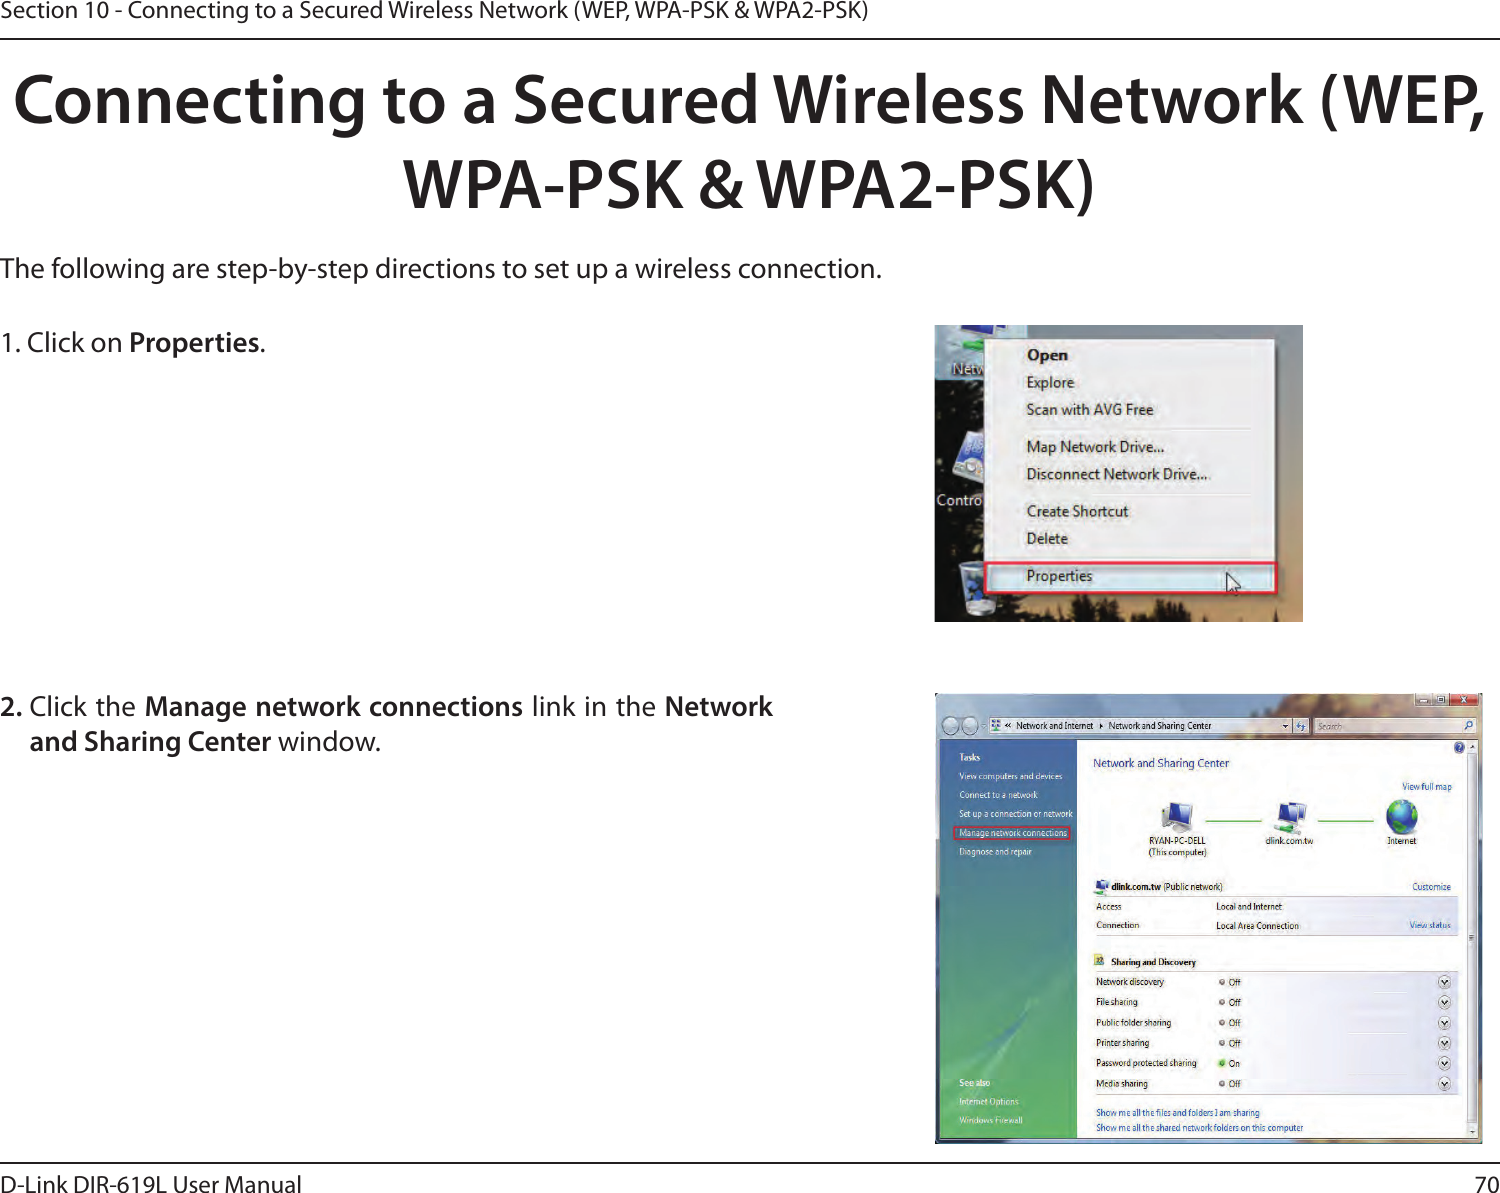 70D-Link DIR-619L User ManualSection 10 - Connecting to a Secured Wireless Network (WEP, WPA-PSK &amp; WPA2-PSK)Connecting to a Secured Wireless Network (WEP, WPA-PSK &amp; WPA2-PSK)The following are step-by-step directions to set up a wireless connection.2. Click the Manage network connections link in the Network and Sharing Center window. 1. Click on Properties.     